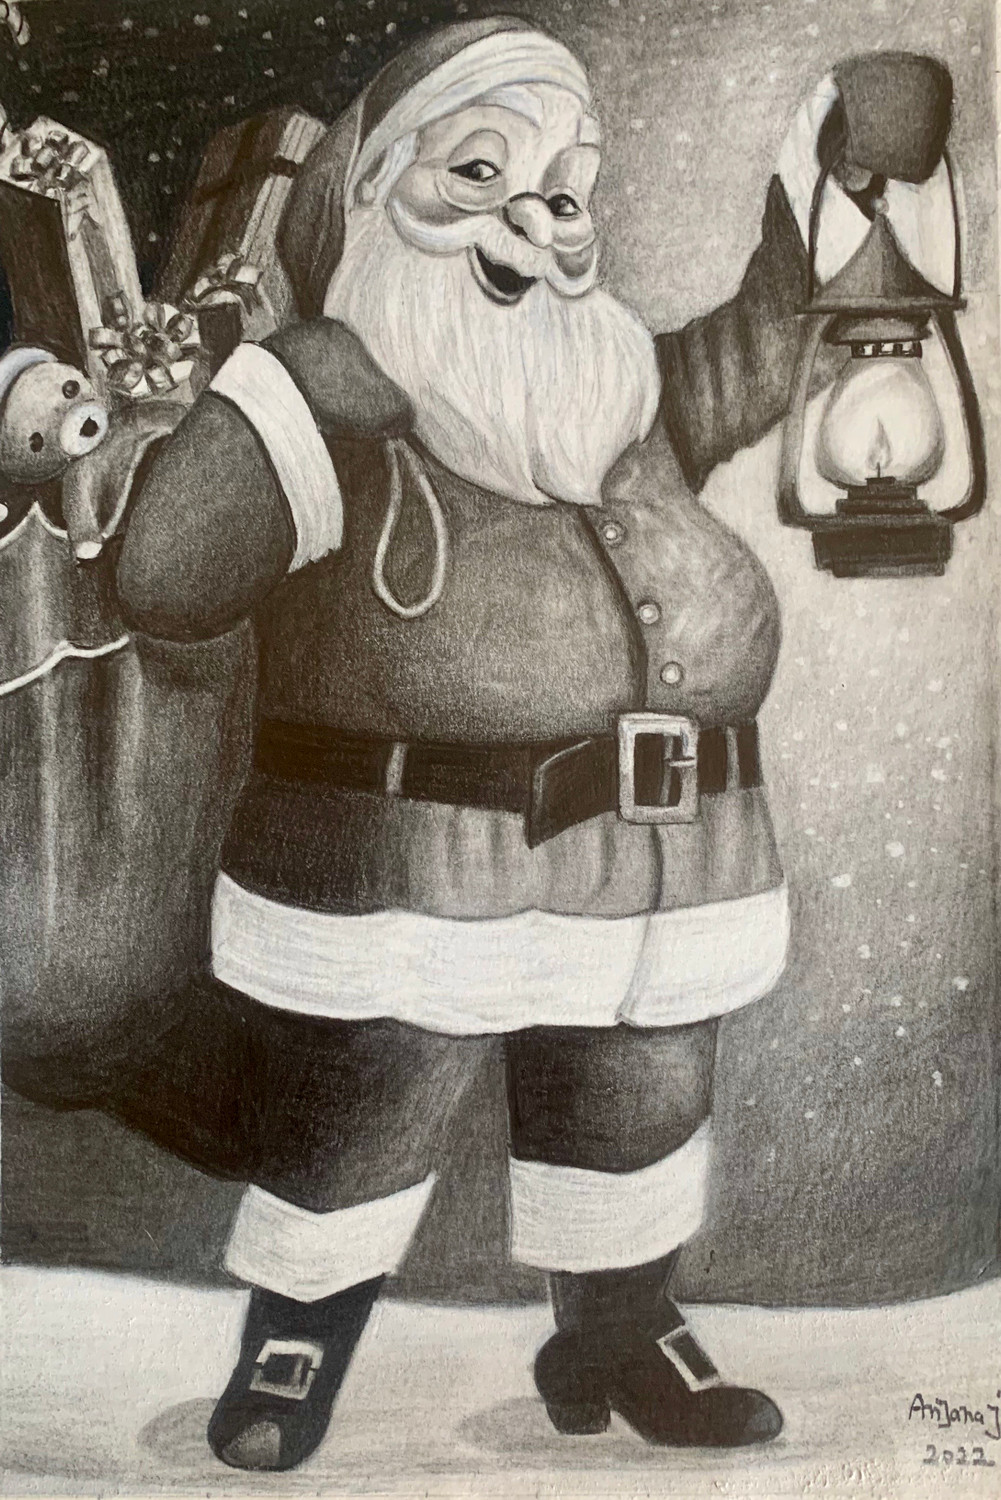 Thomas Nast: Learn About the Man Behind Santa Claus